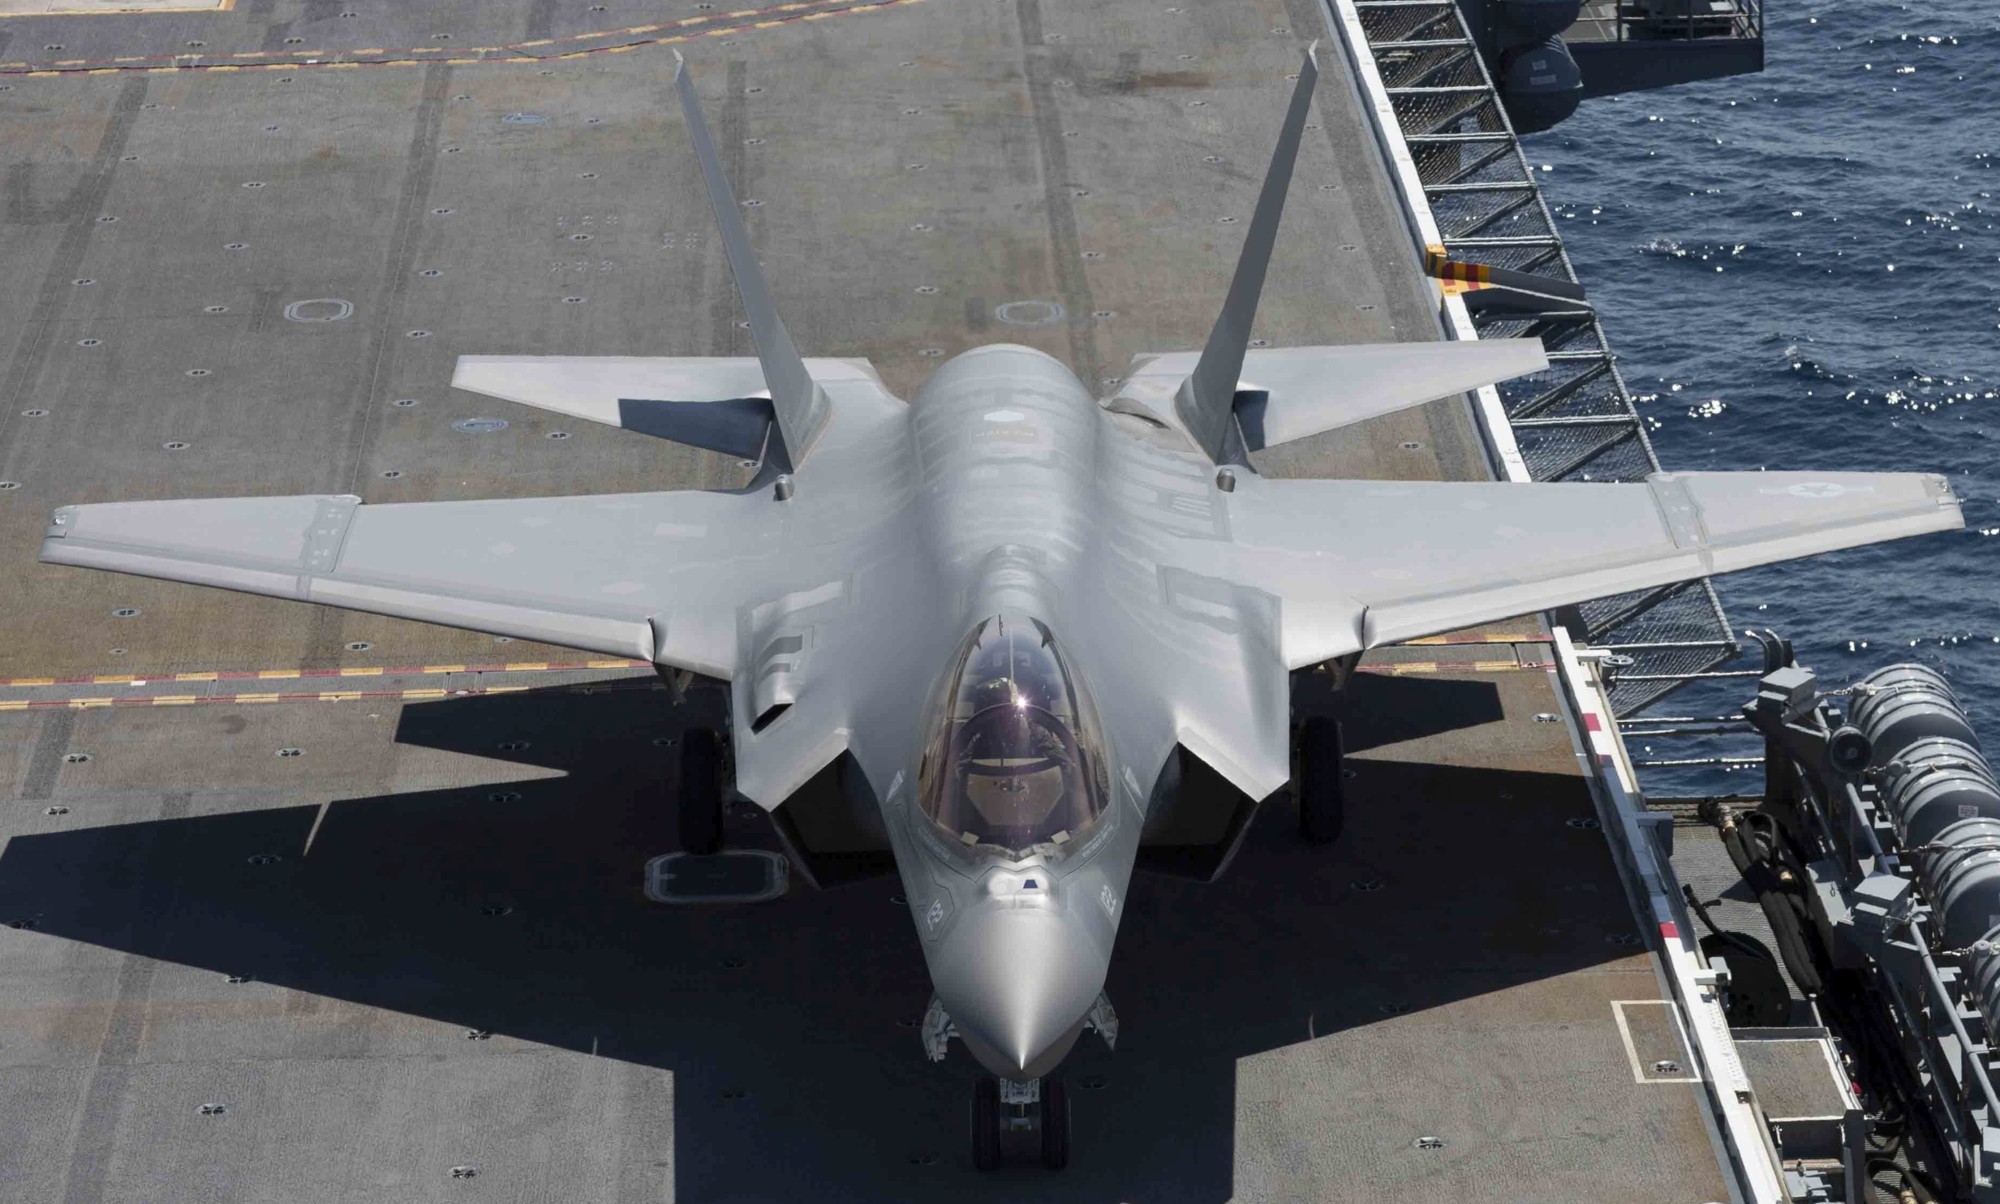 vfa-101 grim reapers strike fighter squadron us navy f-35c lightning jsf frs 23